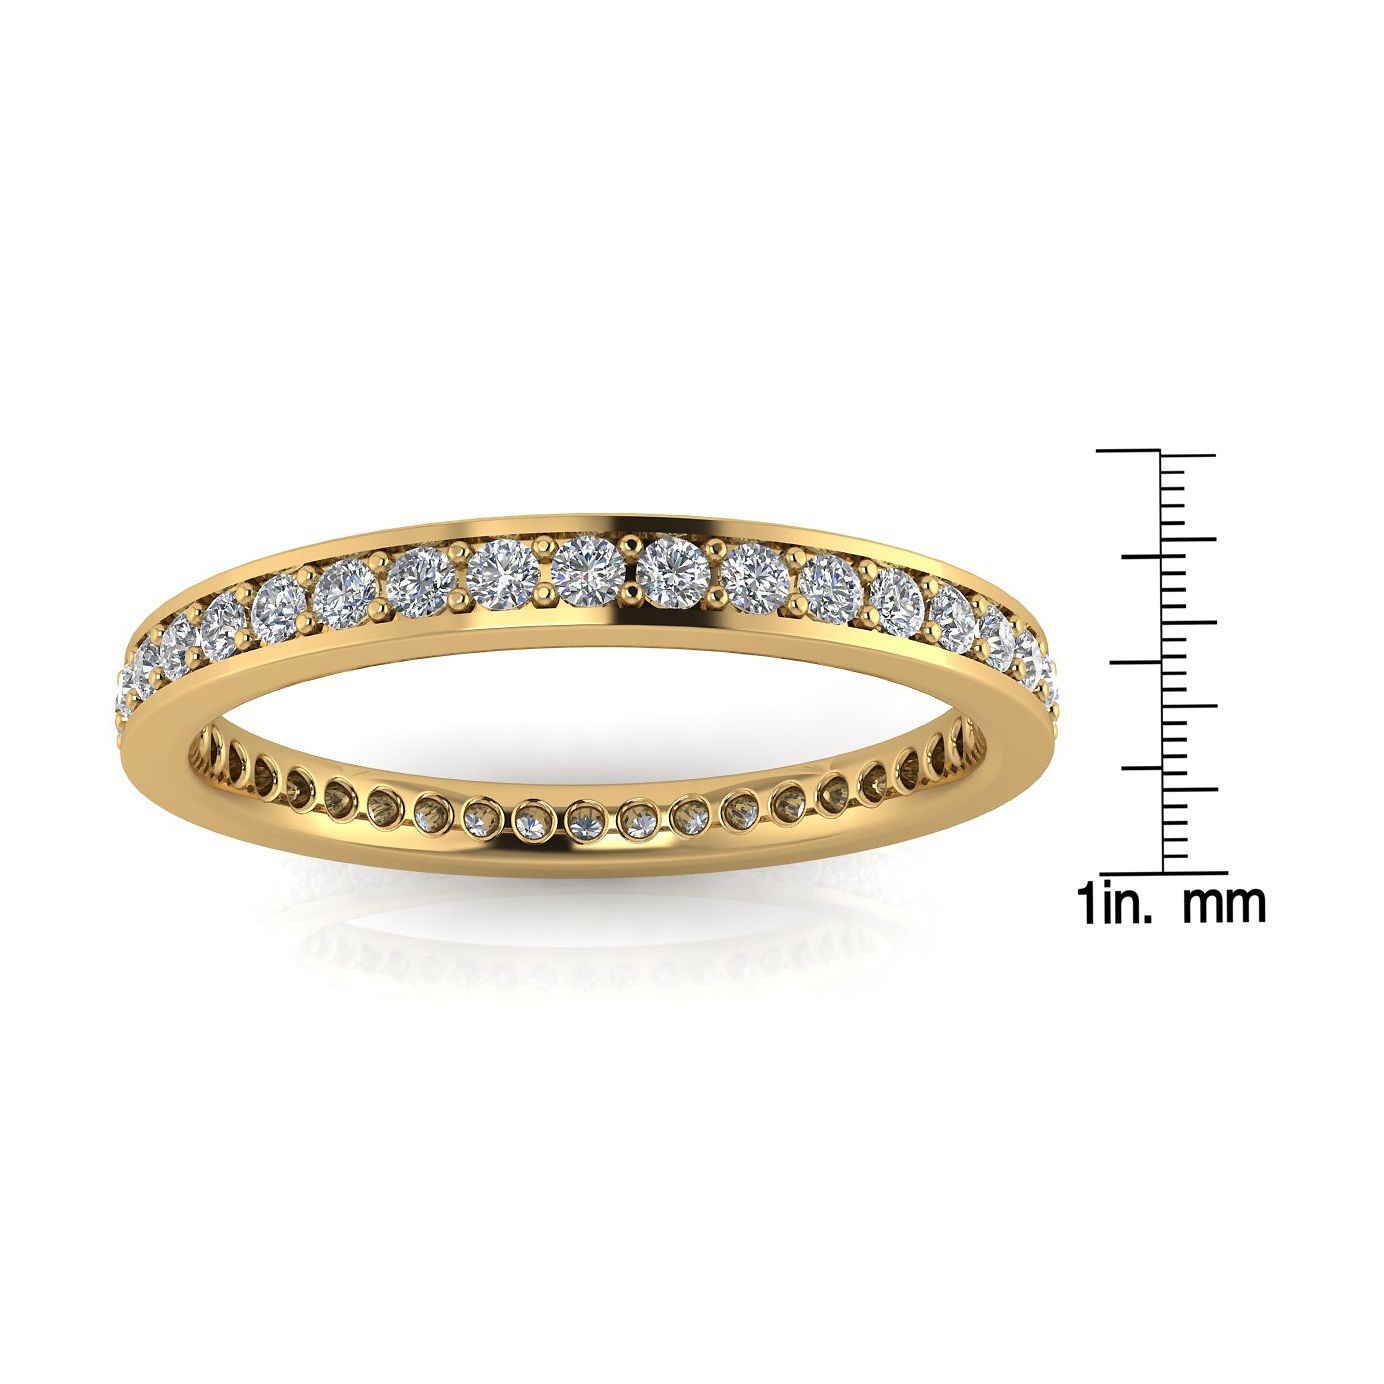 Round Brilliant Cut Diamond Channel Pave Set Eternity Ring In 18k Yellow Gold  (0.68ct. Tw.) Ring Size 5.5